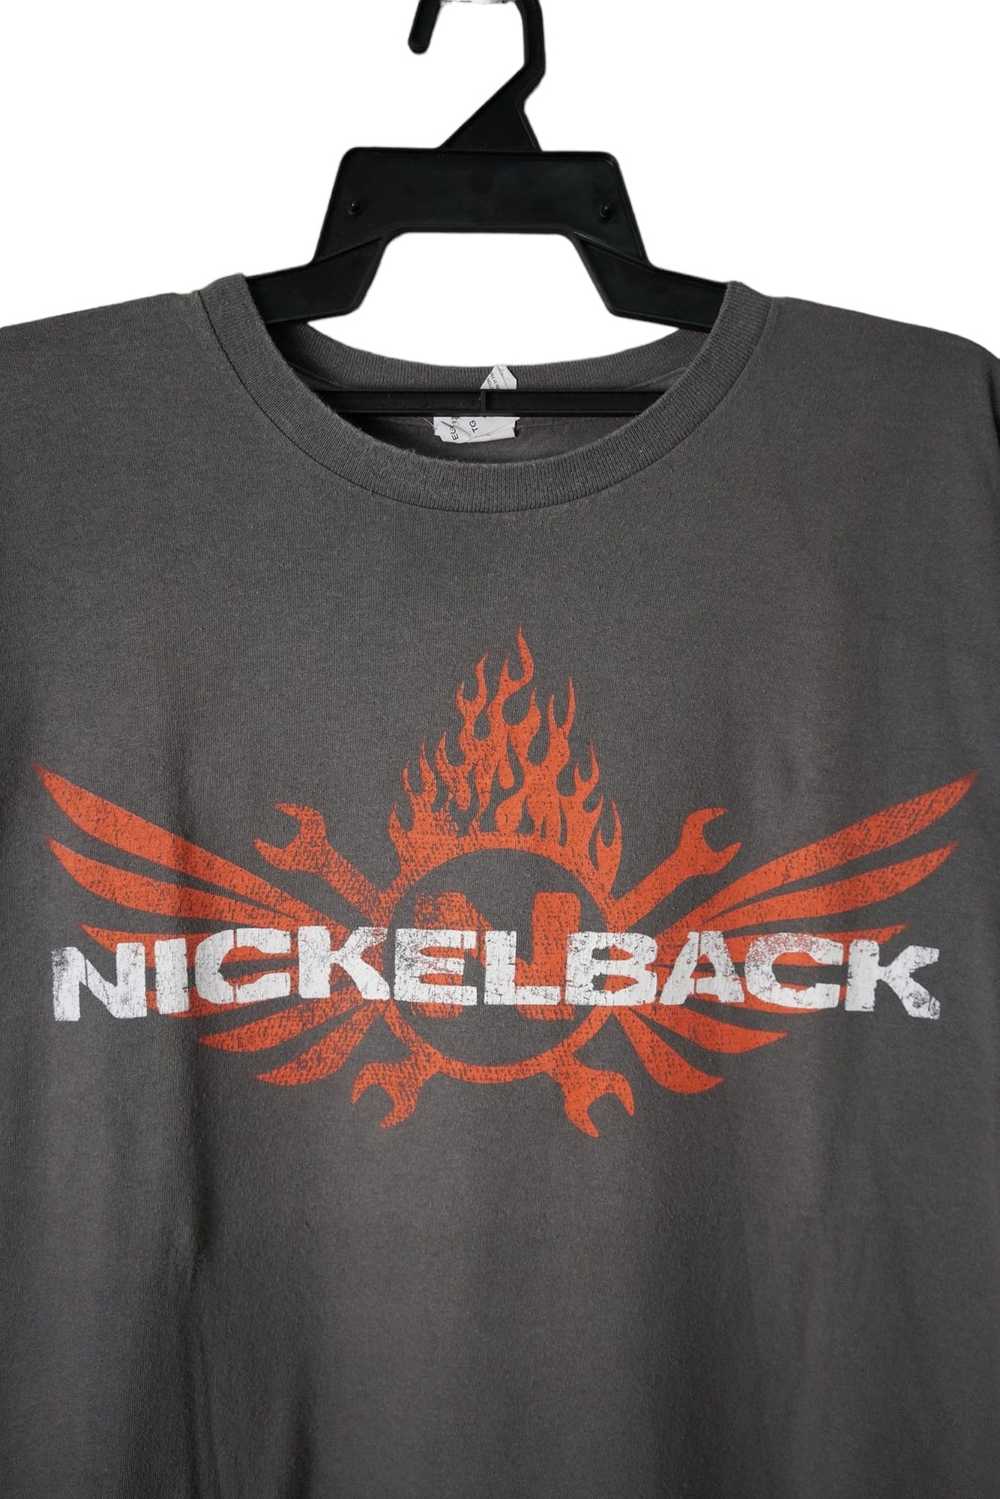 Band Tees × Tour Tee Nickelback Here and Now Nort… - image 3